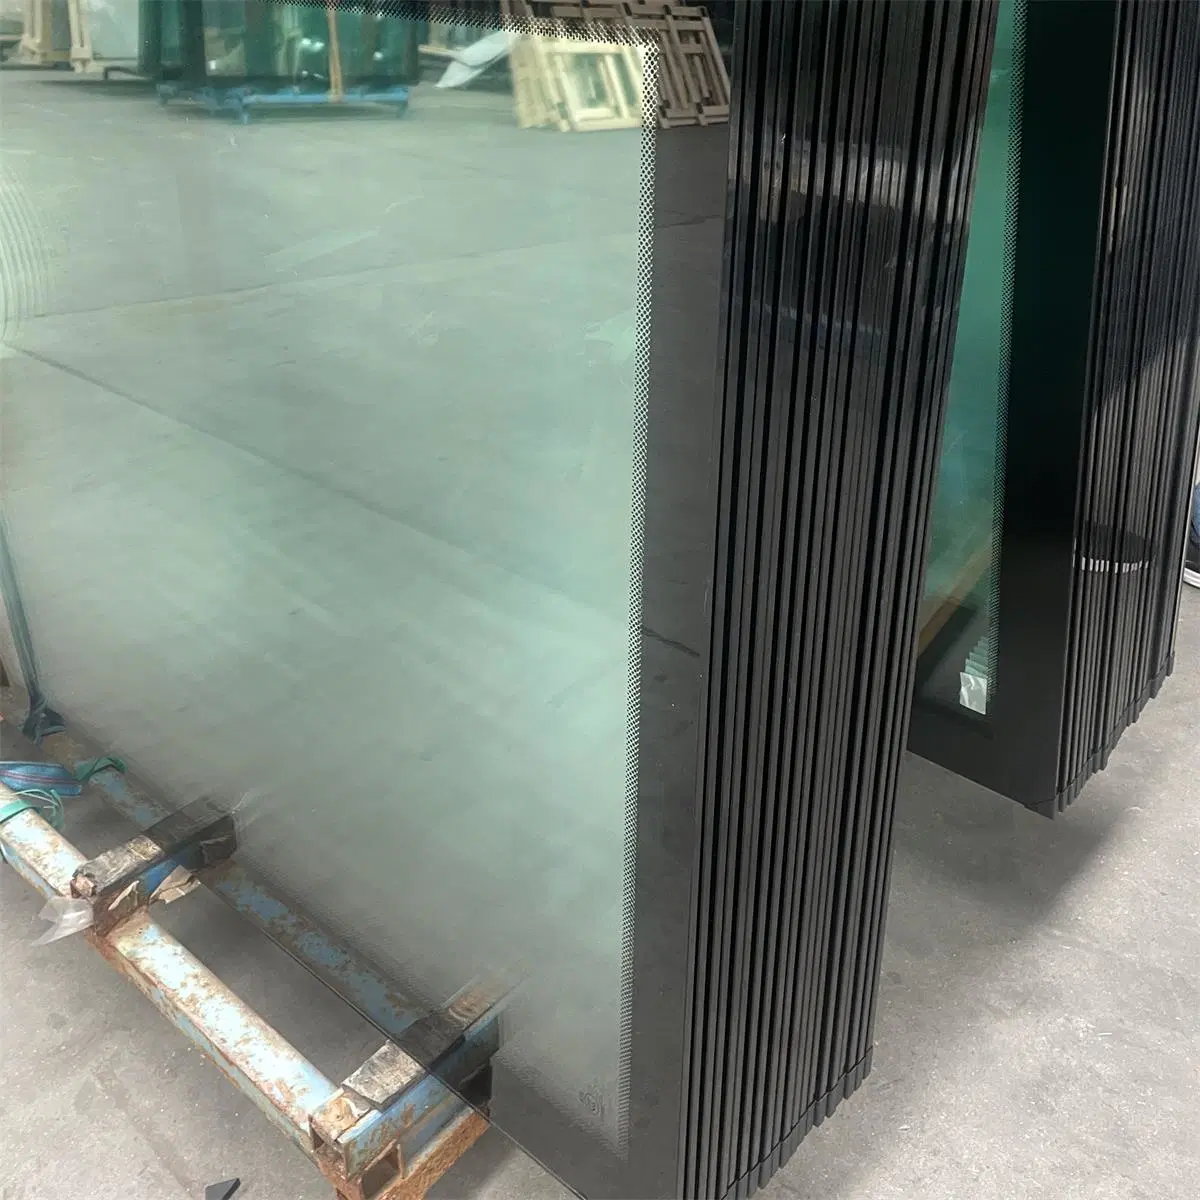 Construction Glass Opaque Tempered Glass Frosted Printed Glass Privacy Frosted Glass Panel